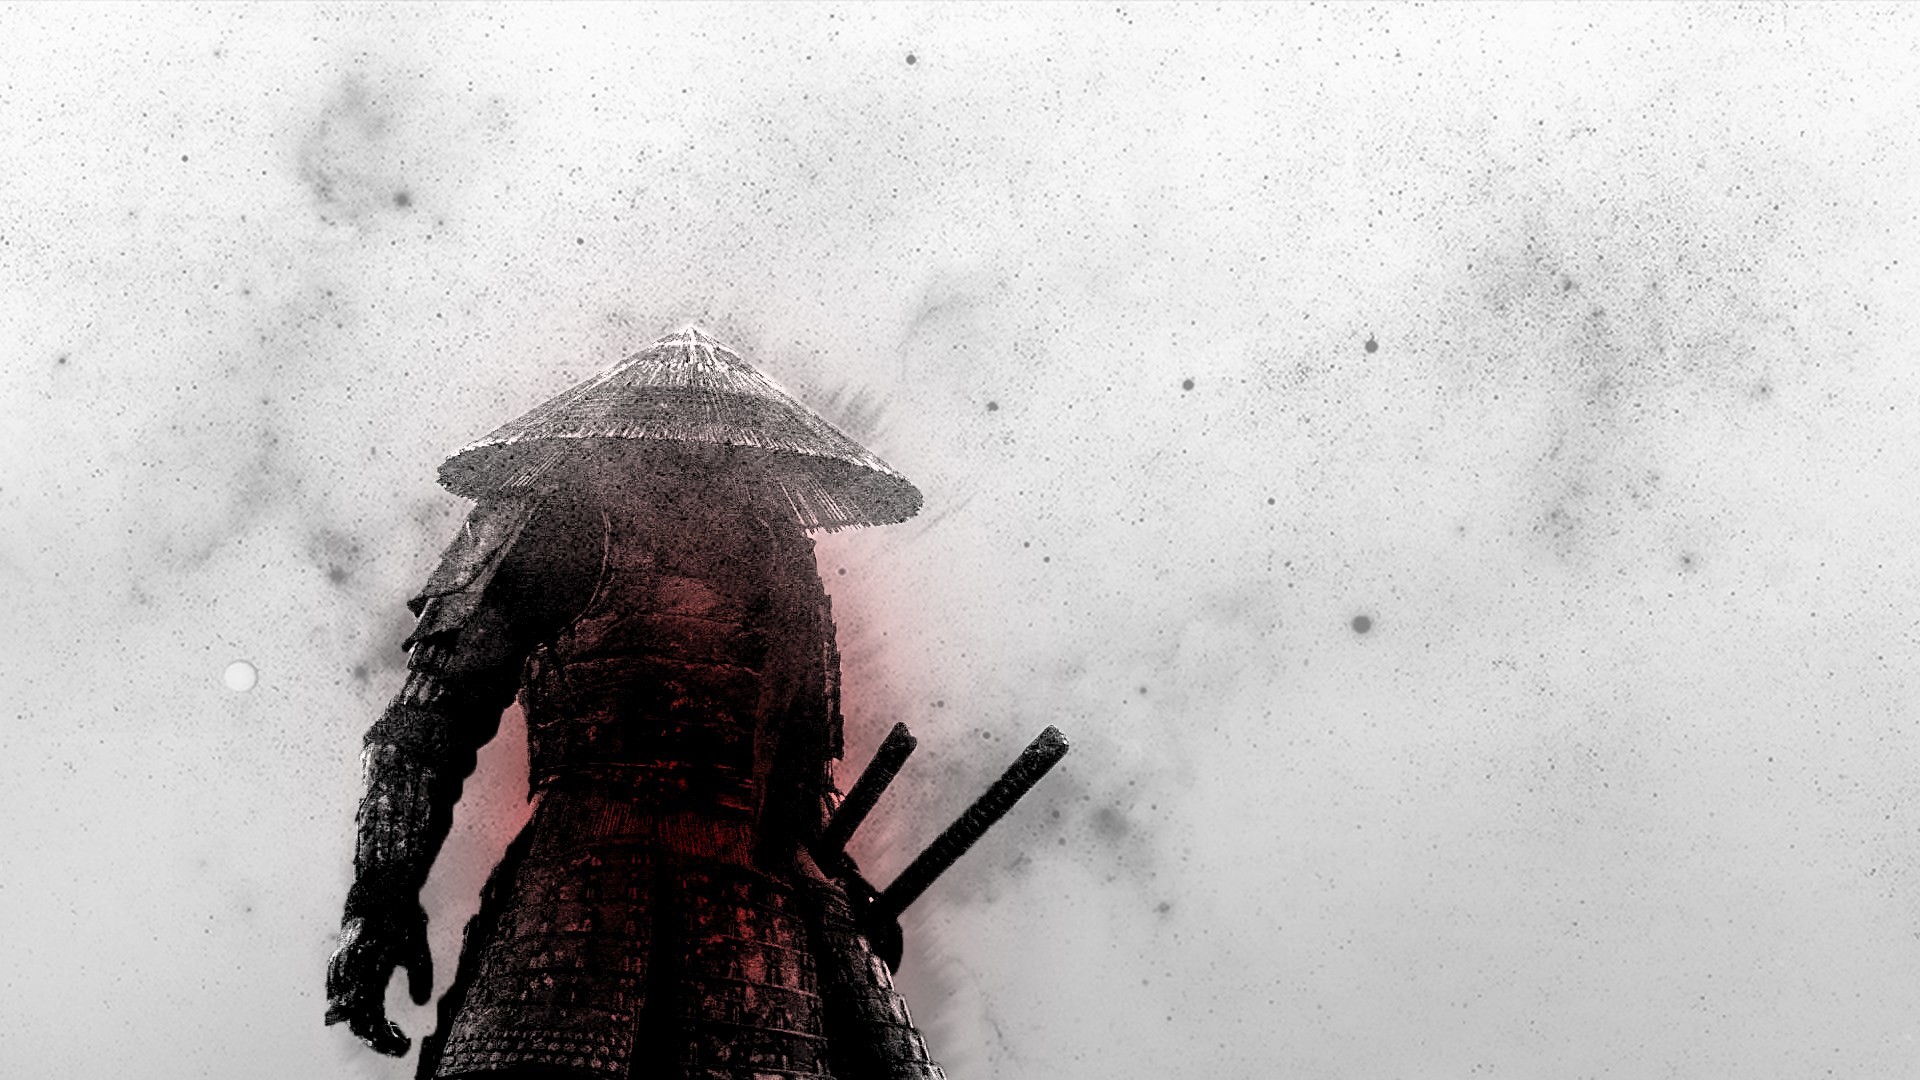 Afro Samurai Wallpapers, HDQ Afro Samurai Images Collection for Japanese Warrior Wallpapers Wallpapers